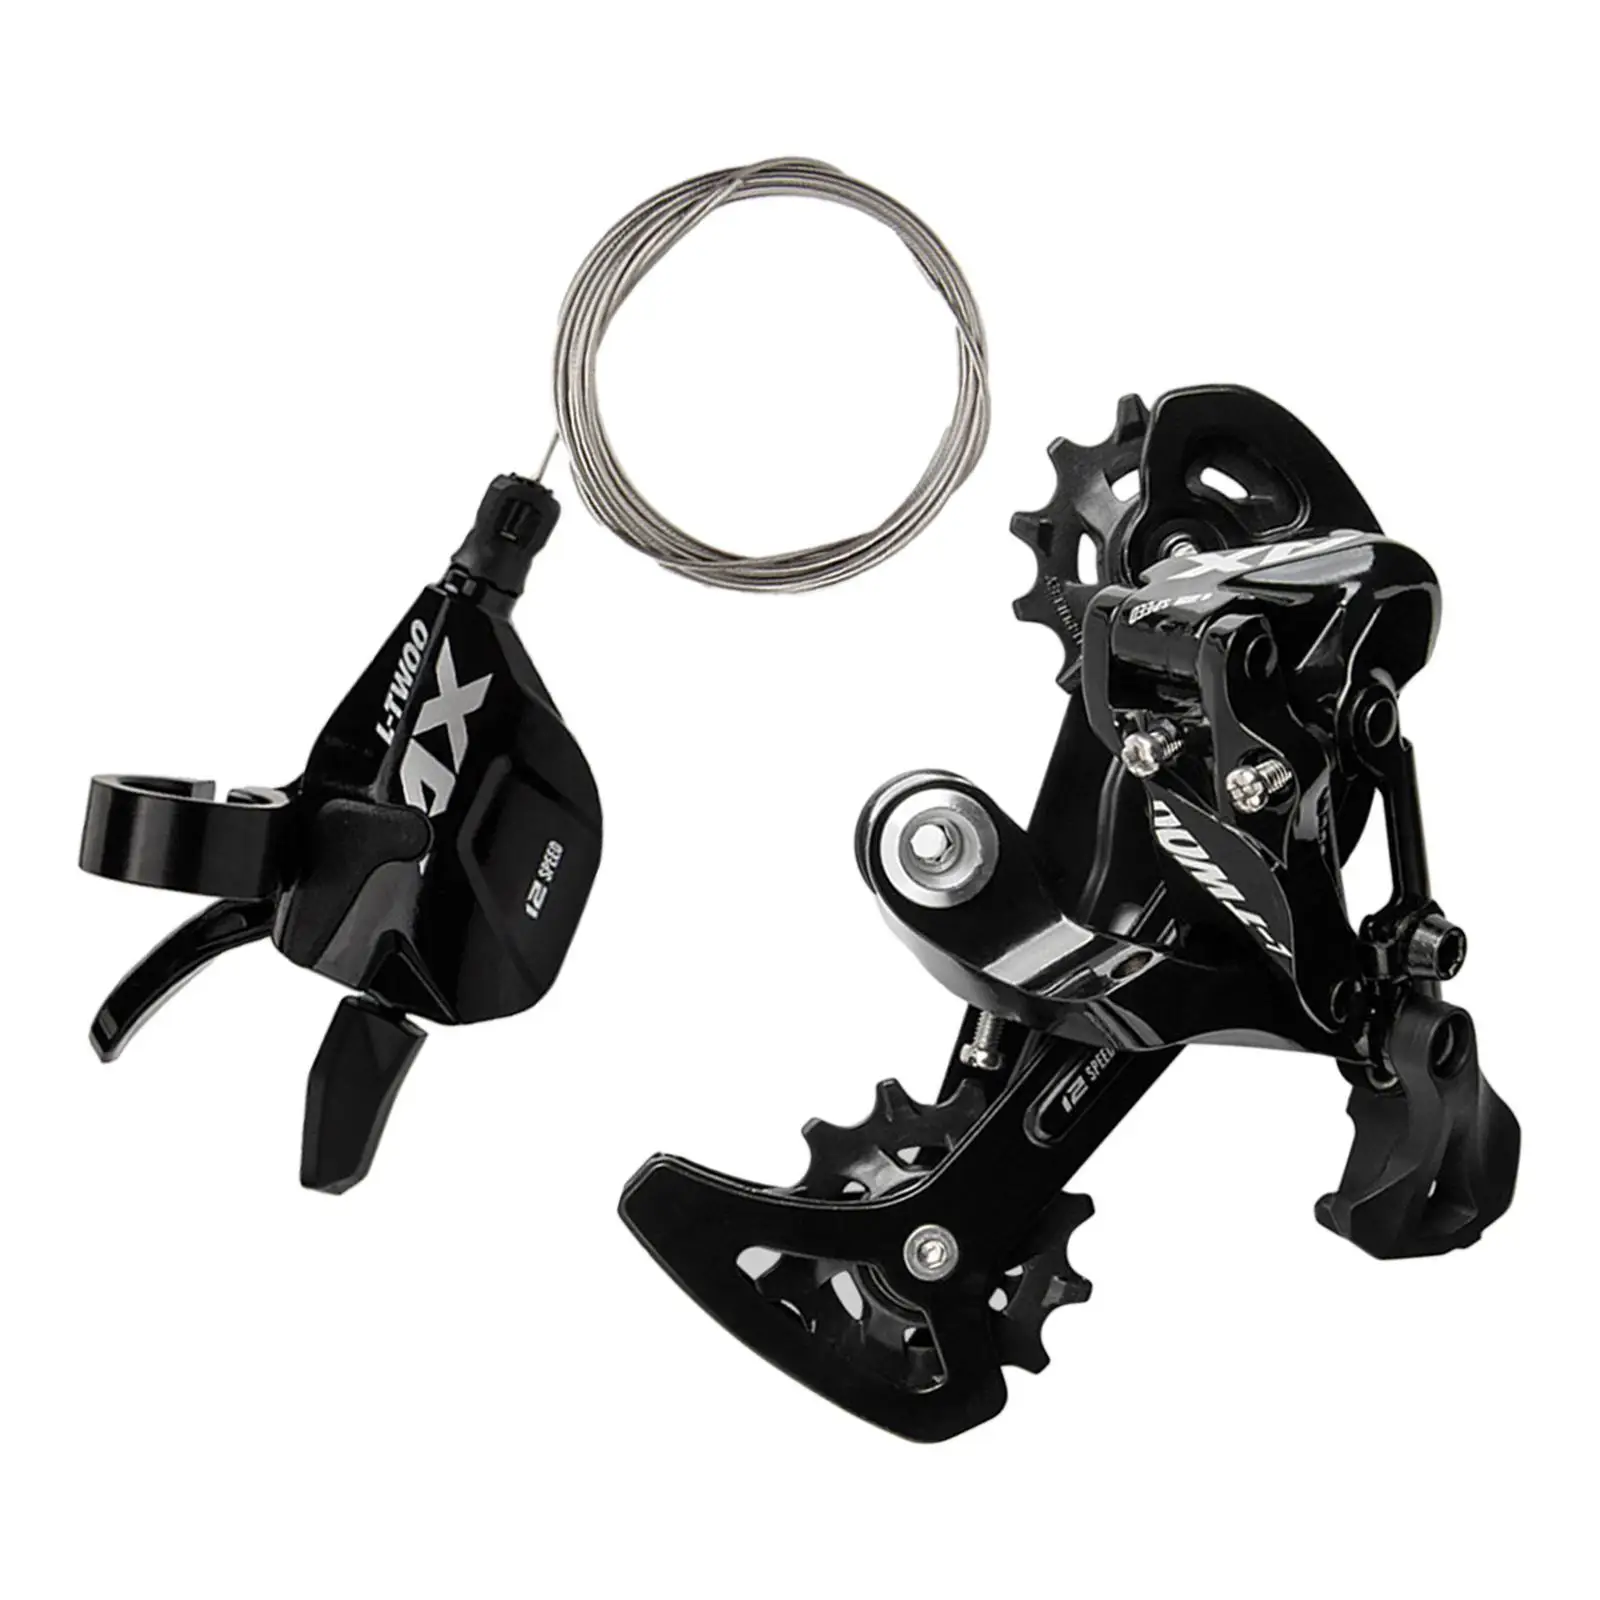 Mountain Bike Bicycle Rear Derailleur Long Cage 12 Speed Direct Mount Aluminum Alloy + Right Shifter Lever Transmission Kit